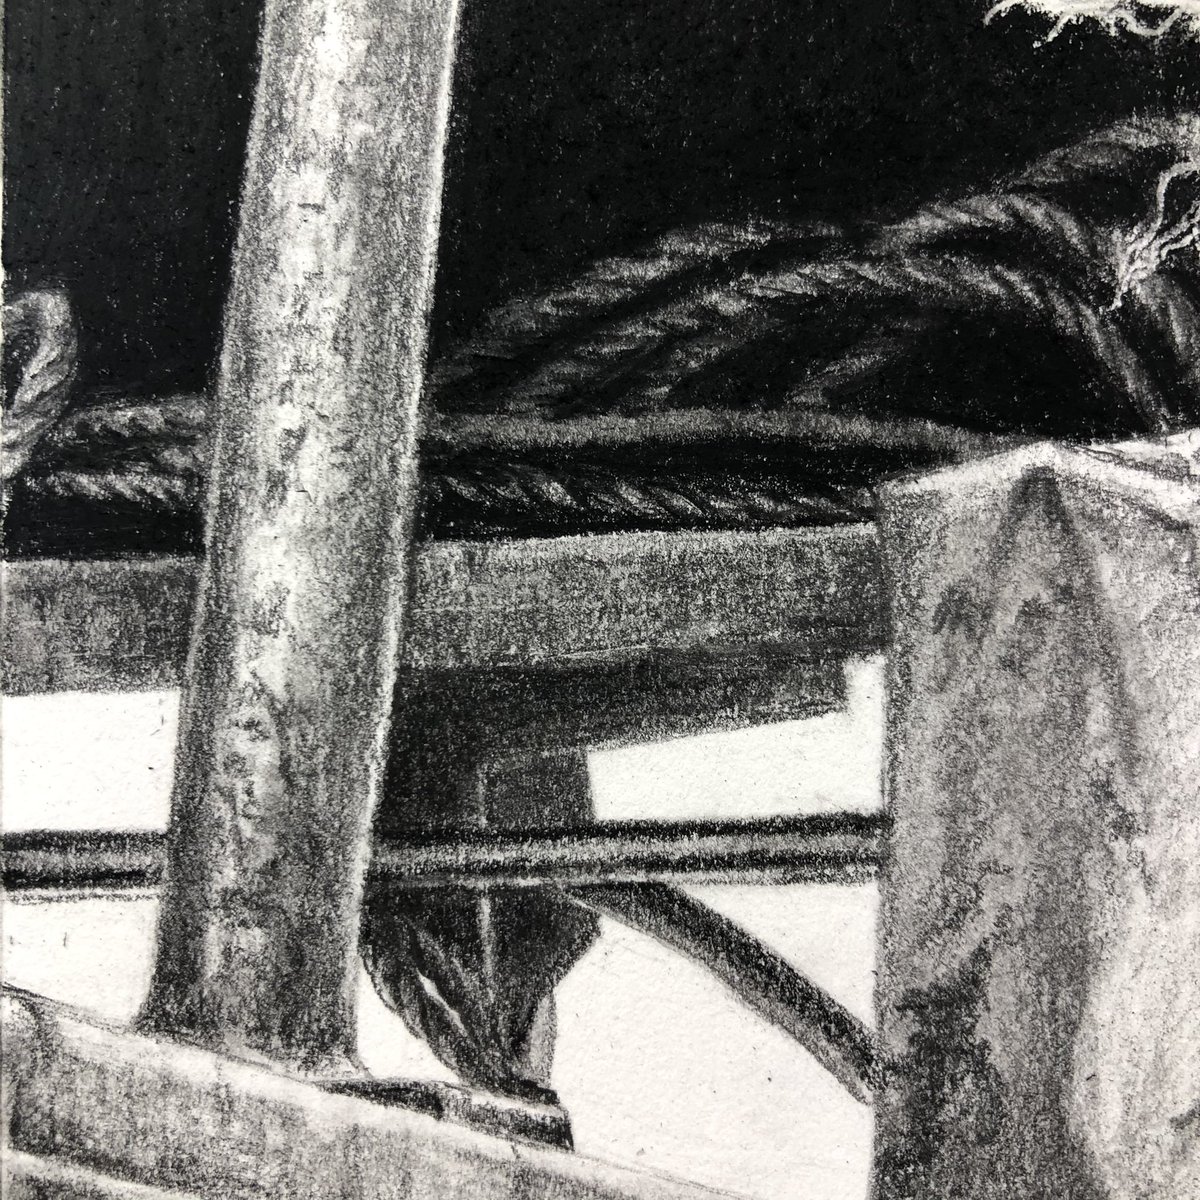 Hope everyone is safe and well ❤️ 
Another boaty drawing on the way...
#drawing #graphite #carbondrawing #graphitedrawing #boatdrawing #cornwall #cadgwith #cornwallart #cornishart #artkernow #alicehole #aliceholeartist 
#wip #drawingdetail #detail #art